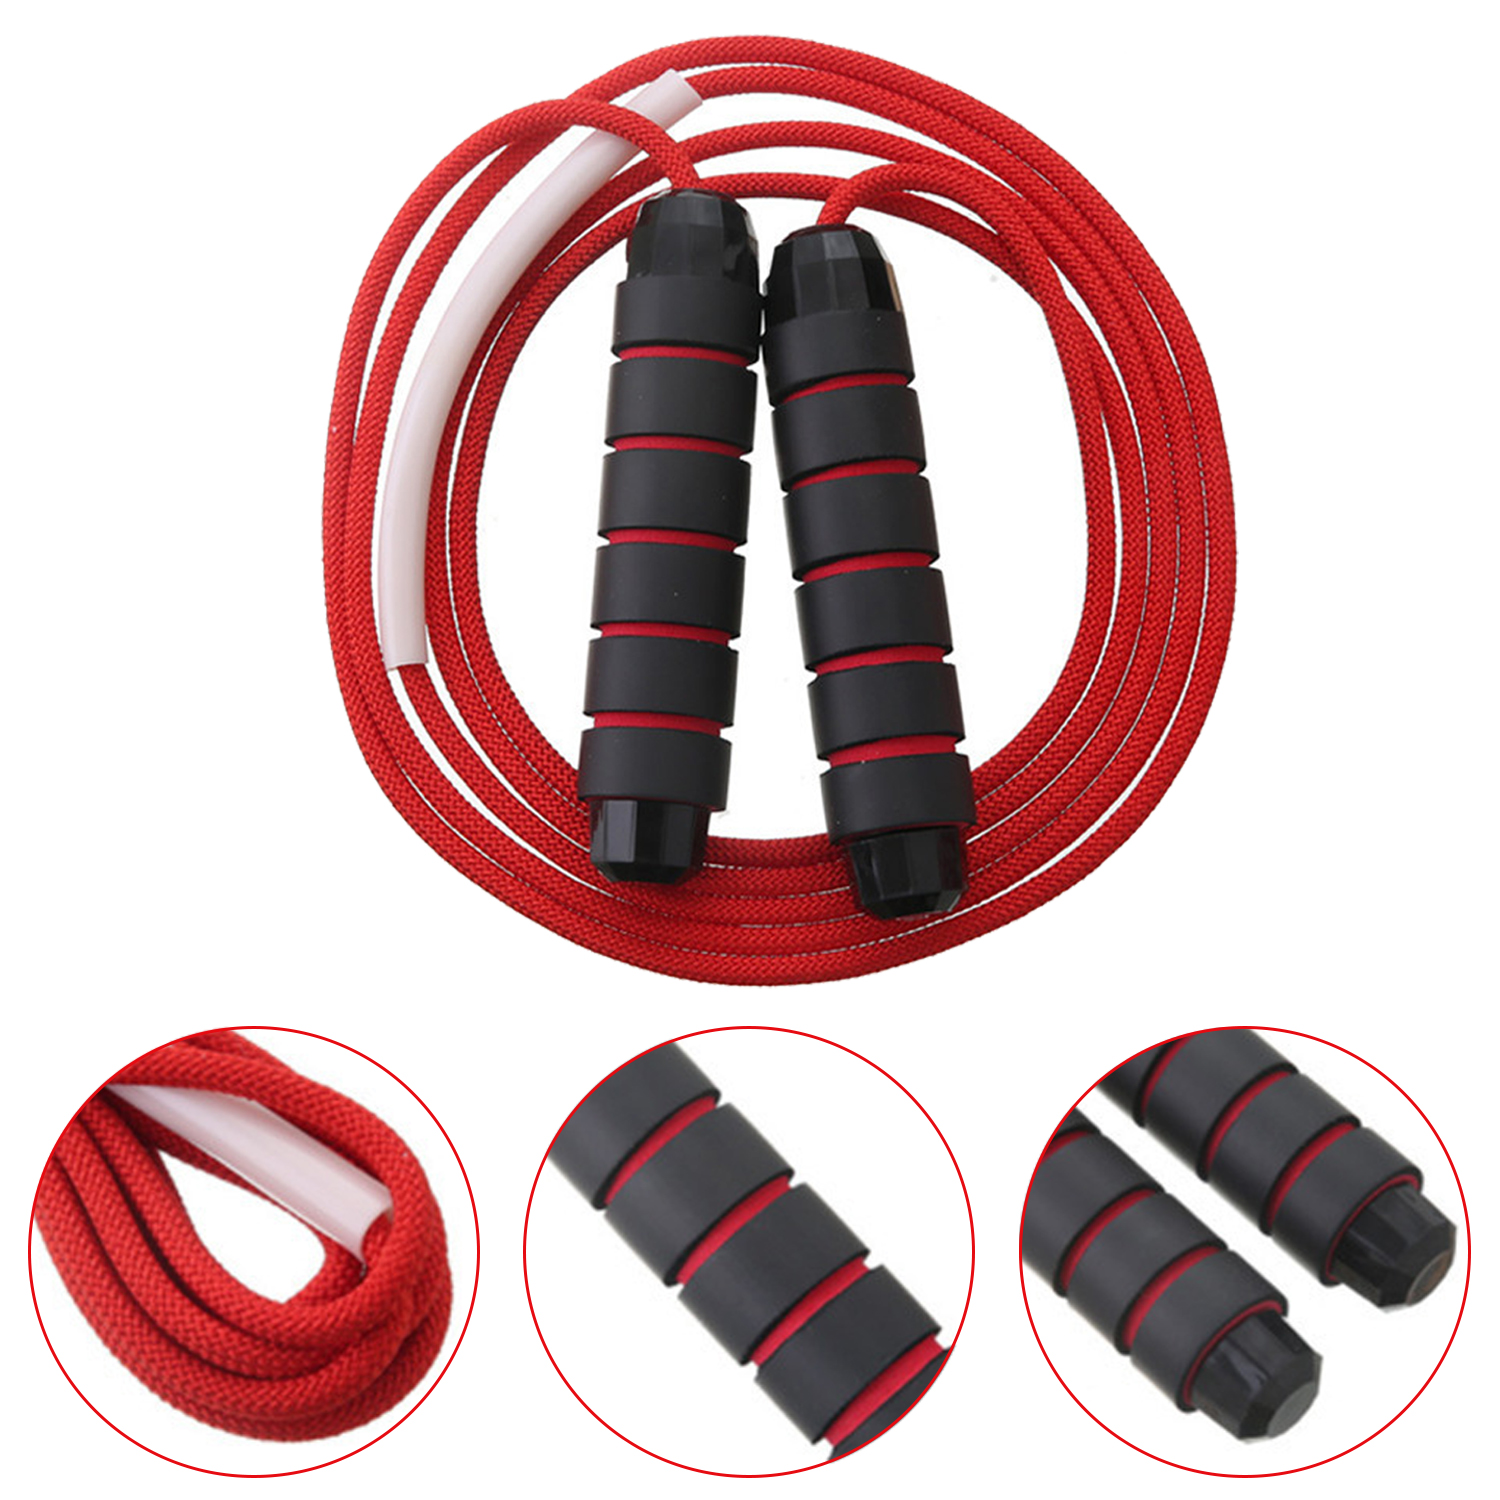 Adjustable 3M Length 6MM Diameter Nylon Weaving Cotton Wire Jump Skipping Rope with Bearing